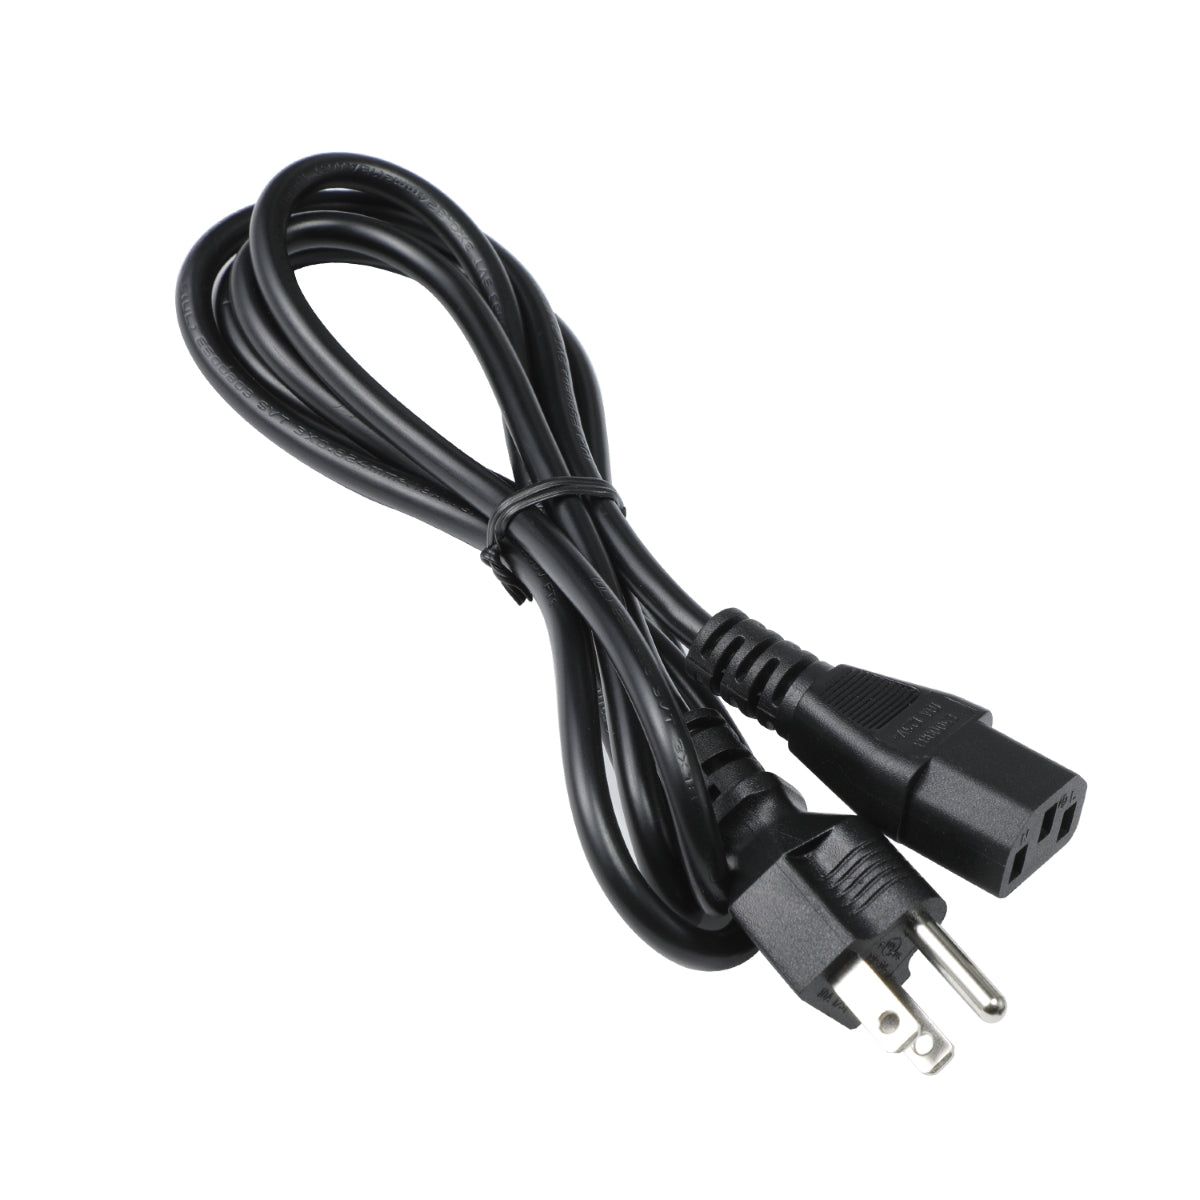 Power Cord for ASUS VP28UQG Monitor